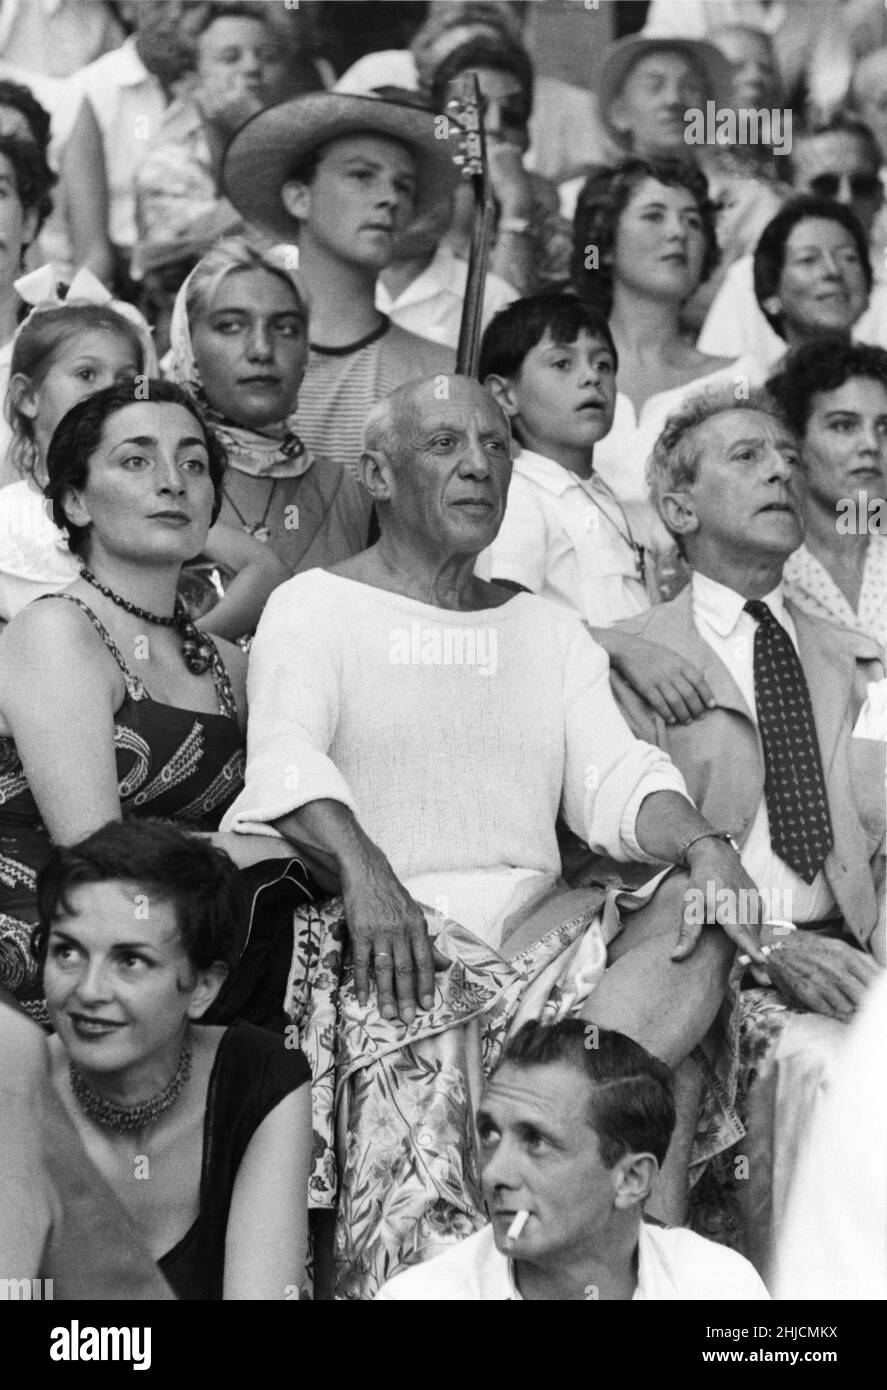 Famous artist Pablo Picasso (1881-1973), with his last lover, Jacqueline Roque, and Jean Cocteau (1889-1963), renowned artist and writer, at a bullfight in Spain. Stock Photo